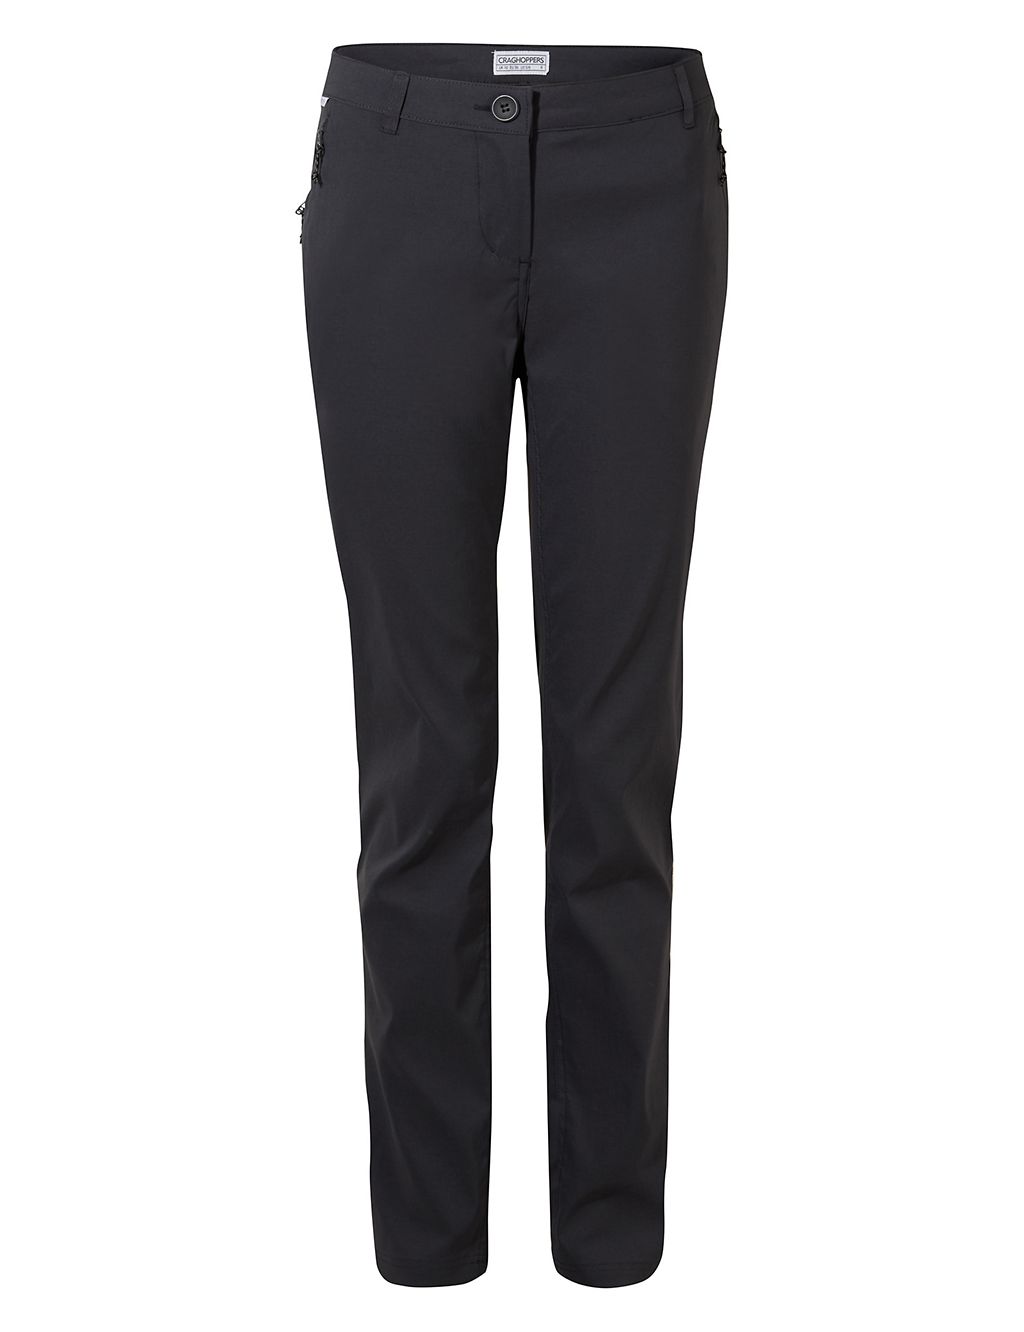 Kiwi Pro Tapered Trousers 1 of 6